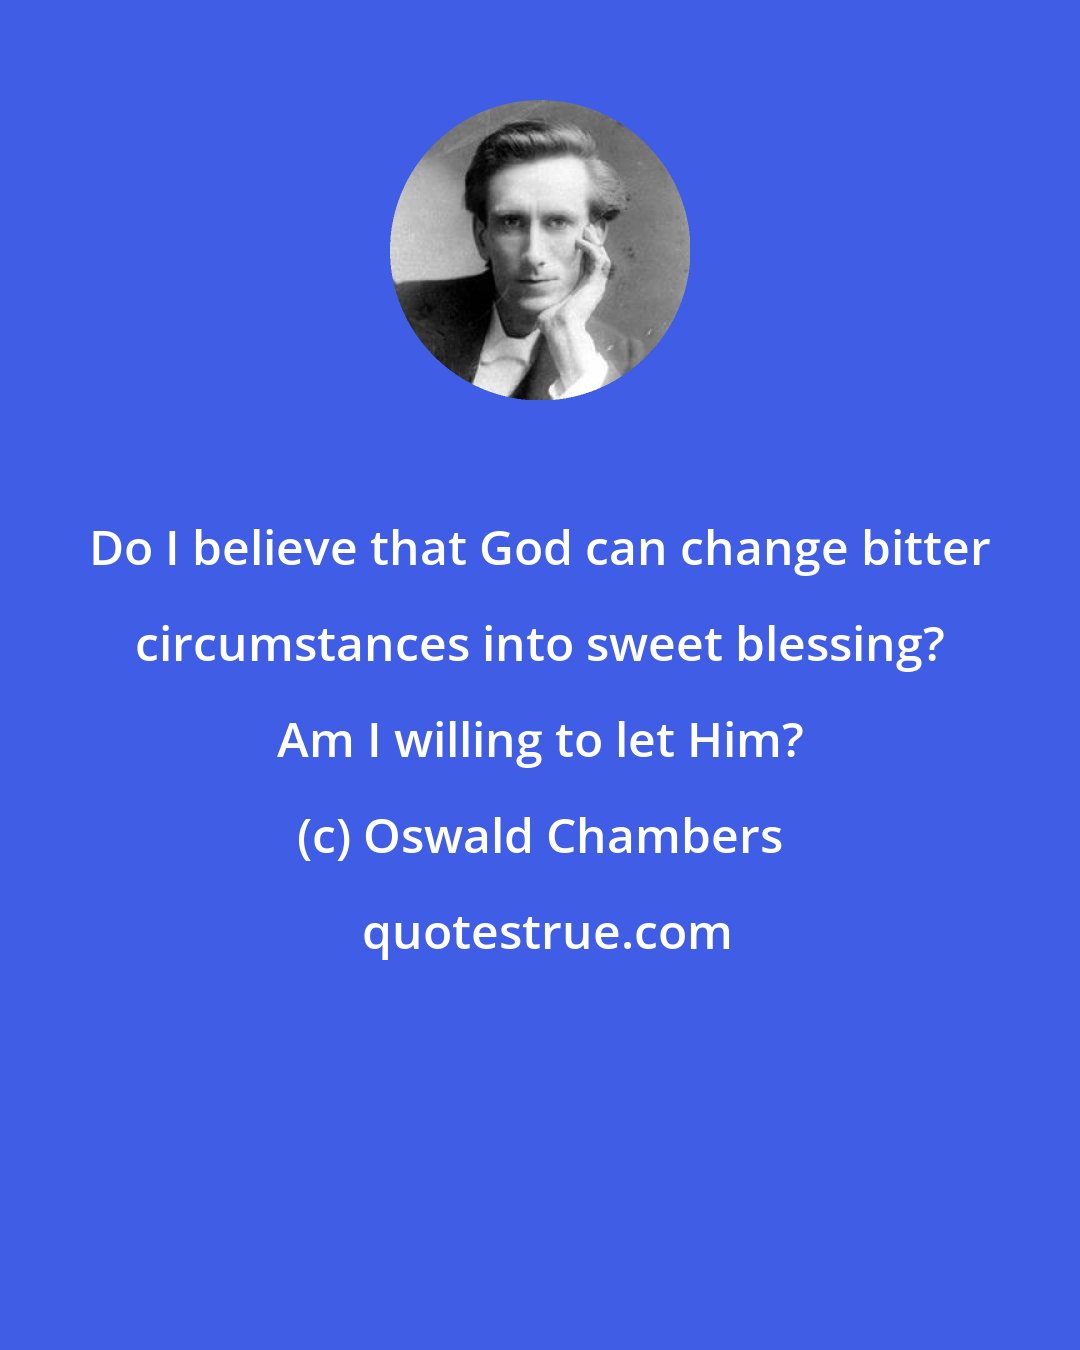 Oswald Chambers: Do I believe that God can change bitter circumstances into sweet blessing? Am I willing to let Him?